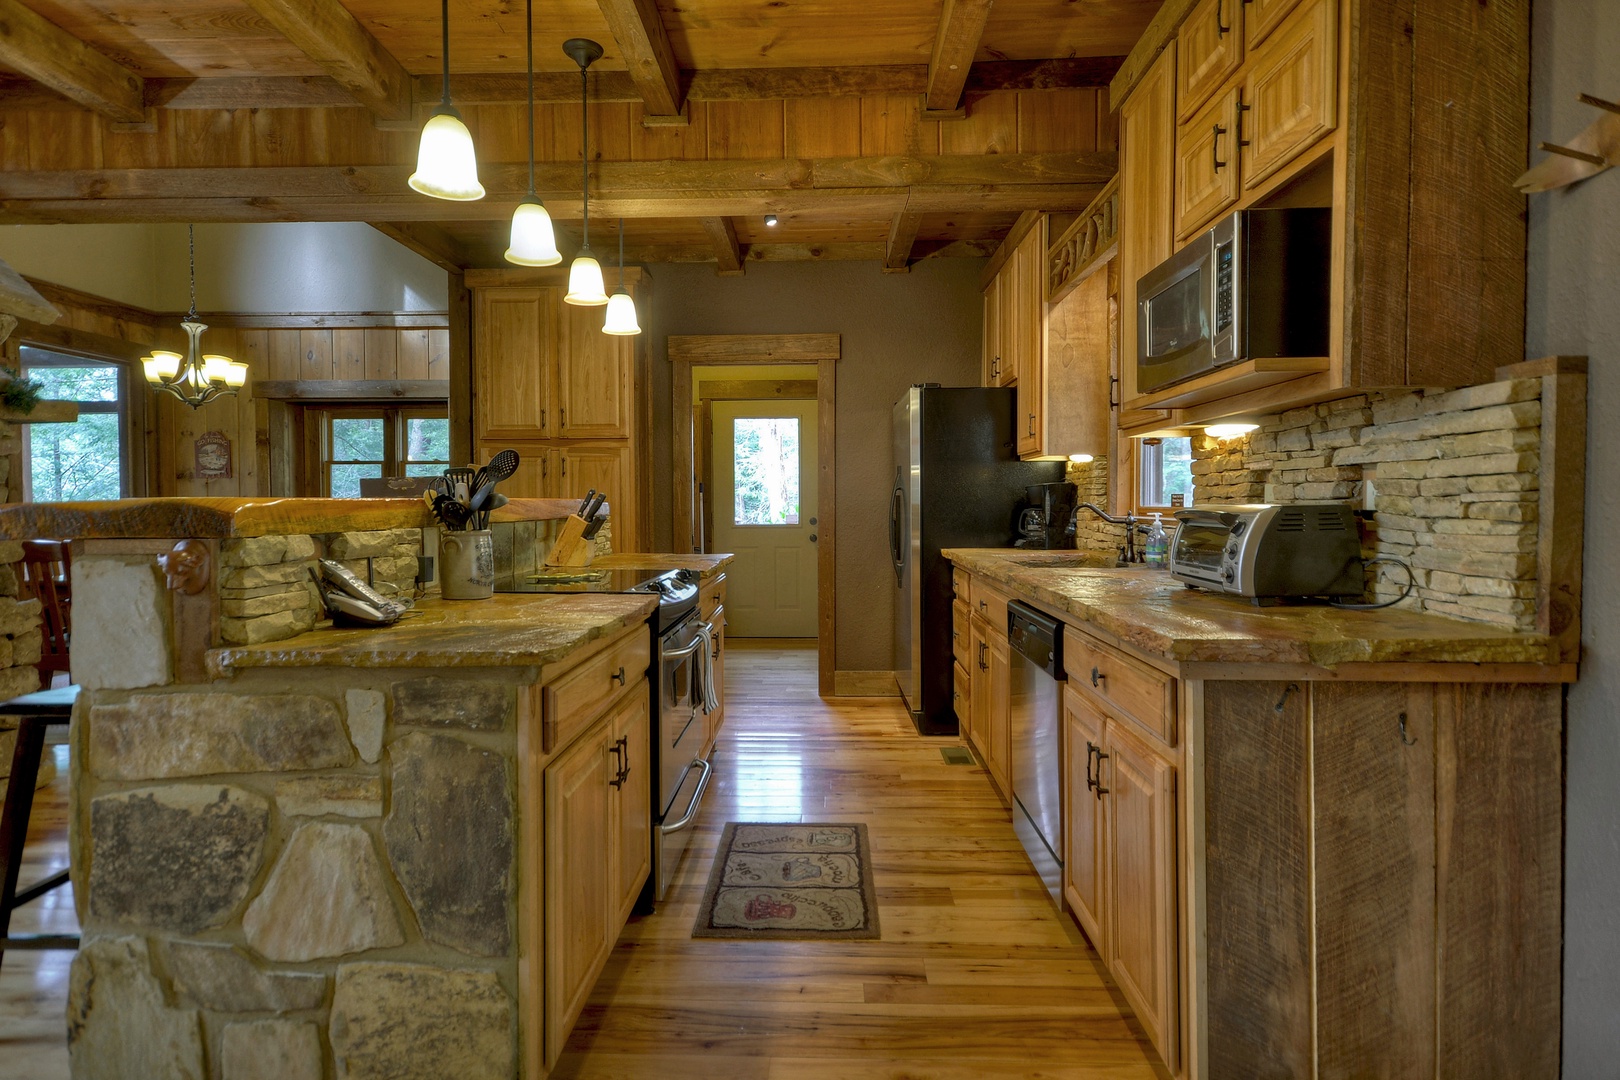 Reel Creek Lodge- Fully equipped kitchen area with rustic stone designs